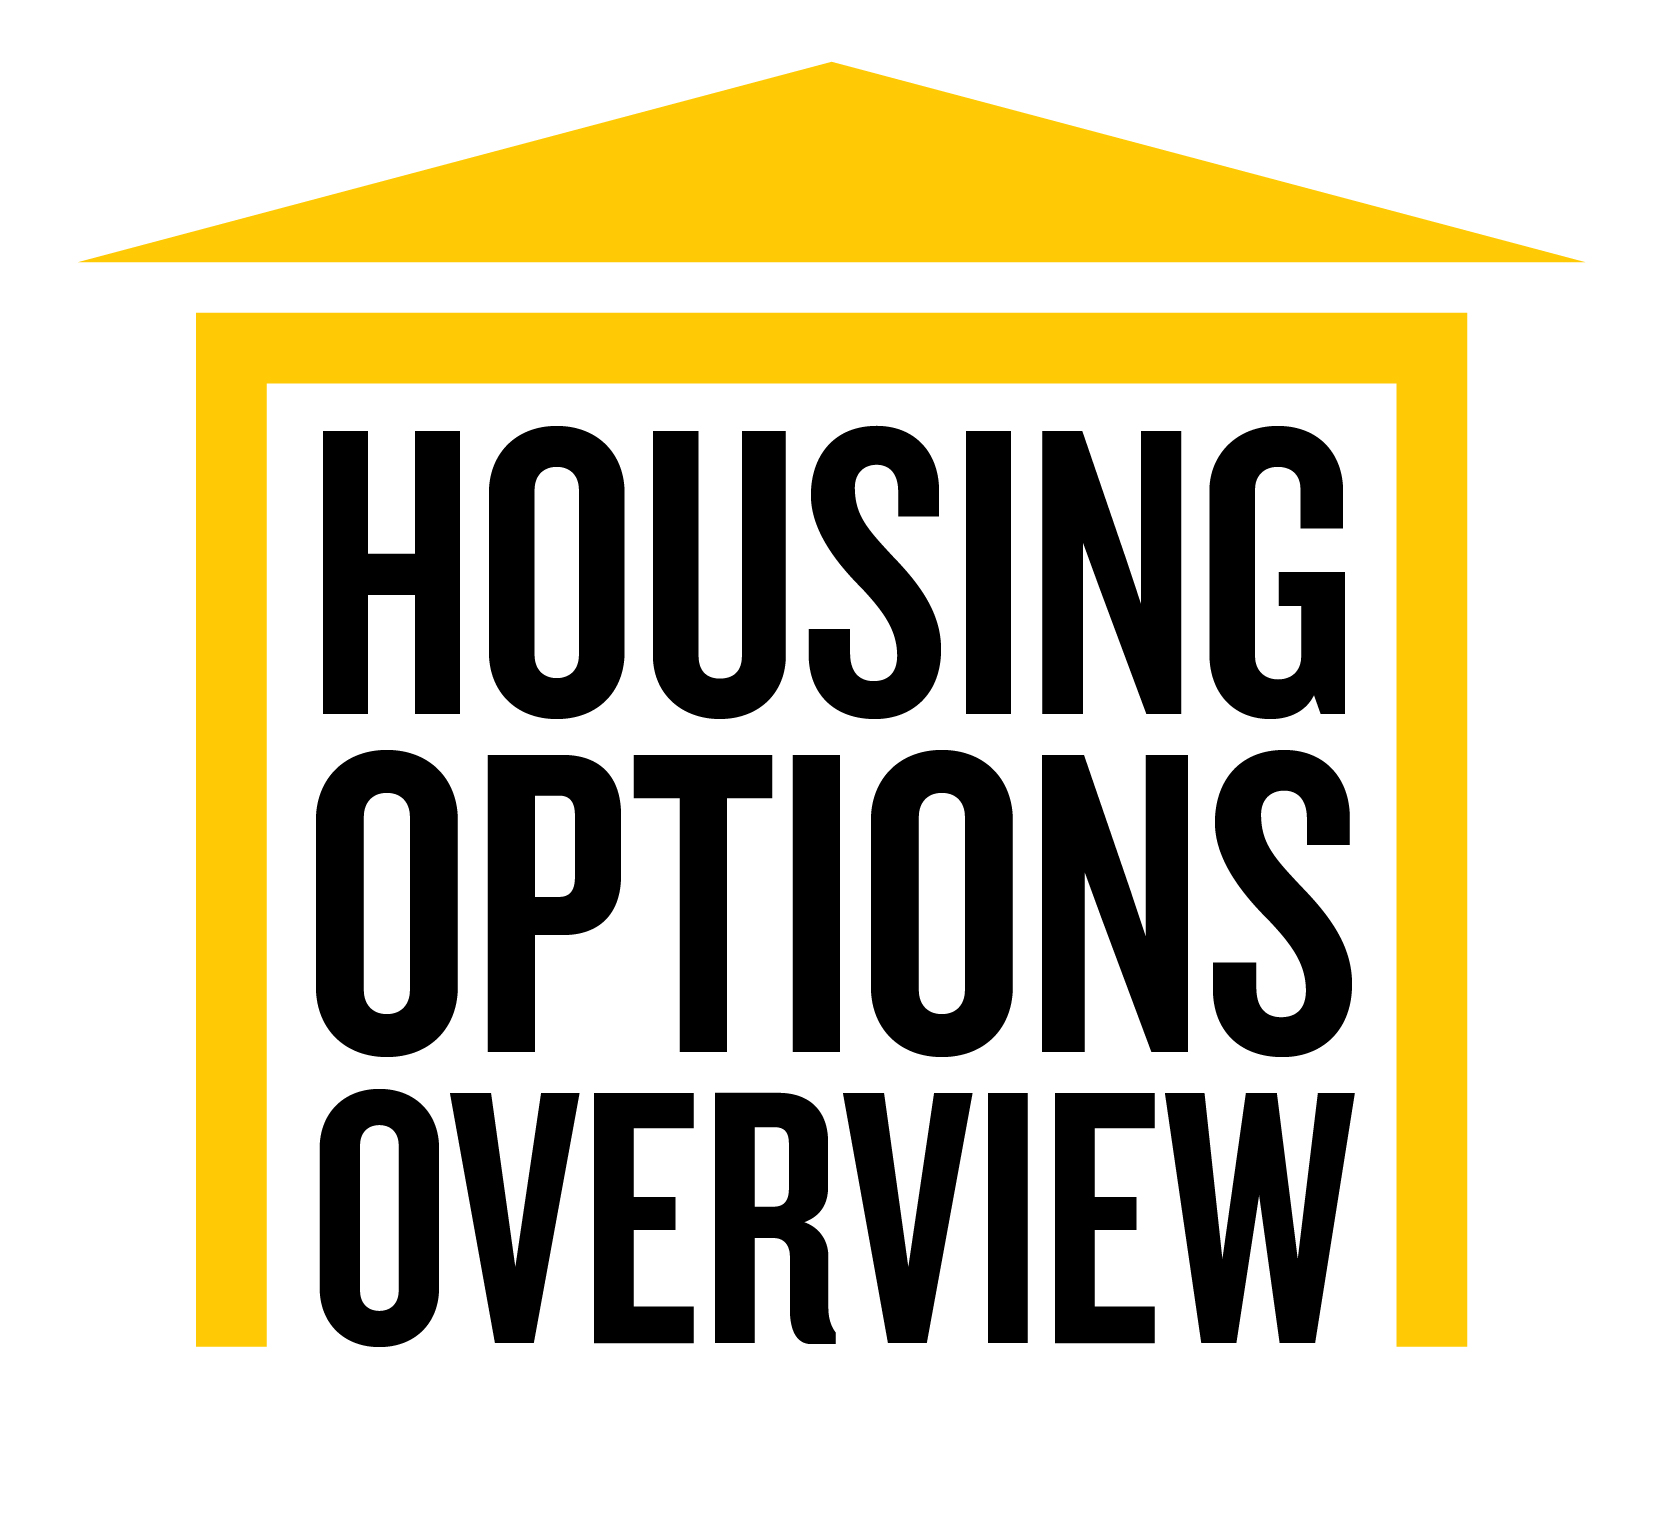 Housing options overview